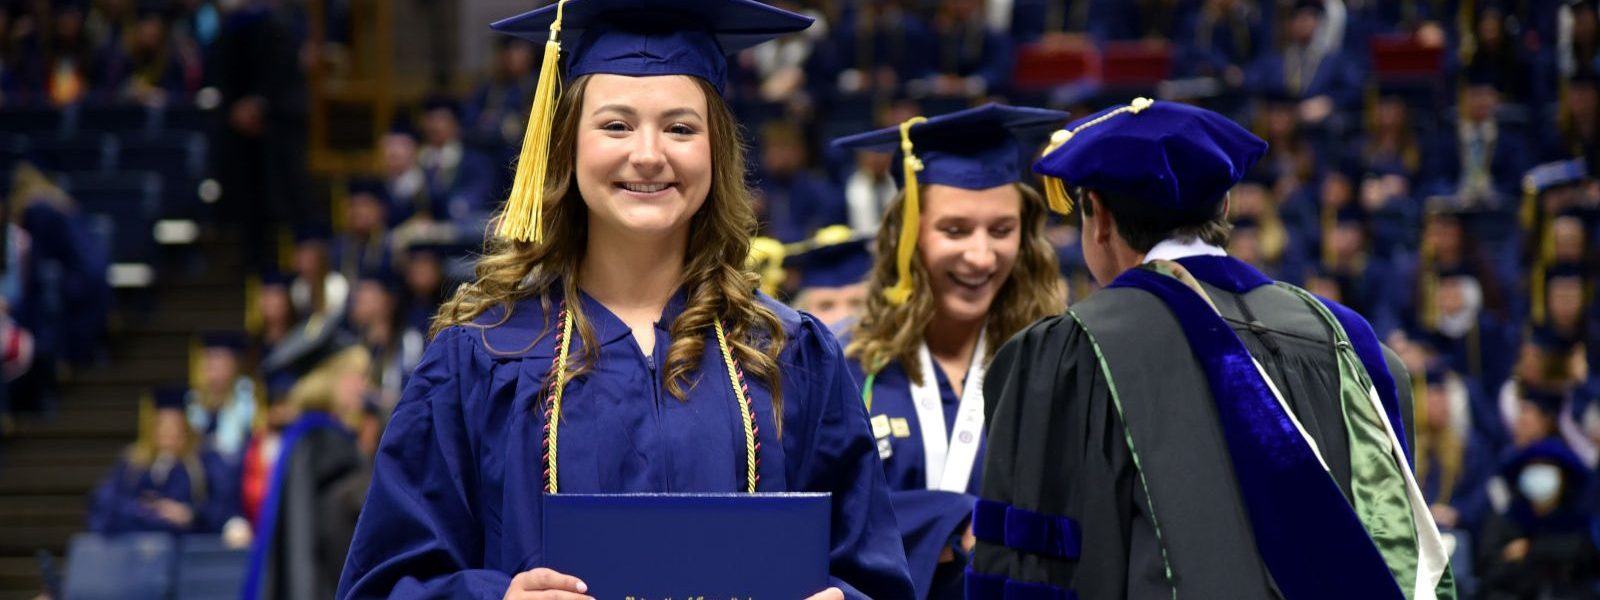 2022 College of Agriculture, Health and Natural Resources Commencement at Gampel Pavilion. May 7, 2022. (Dalton Scott/UConn Photo)